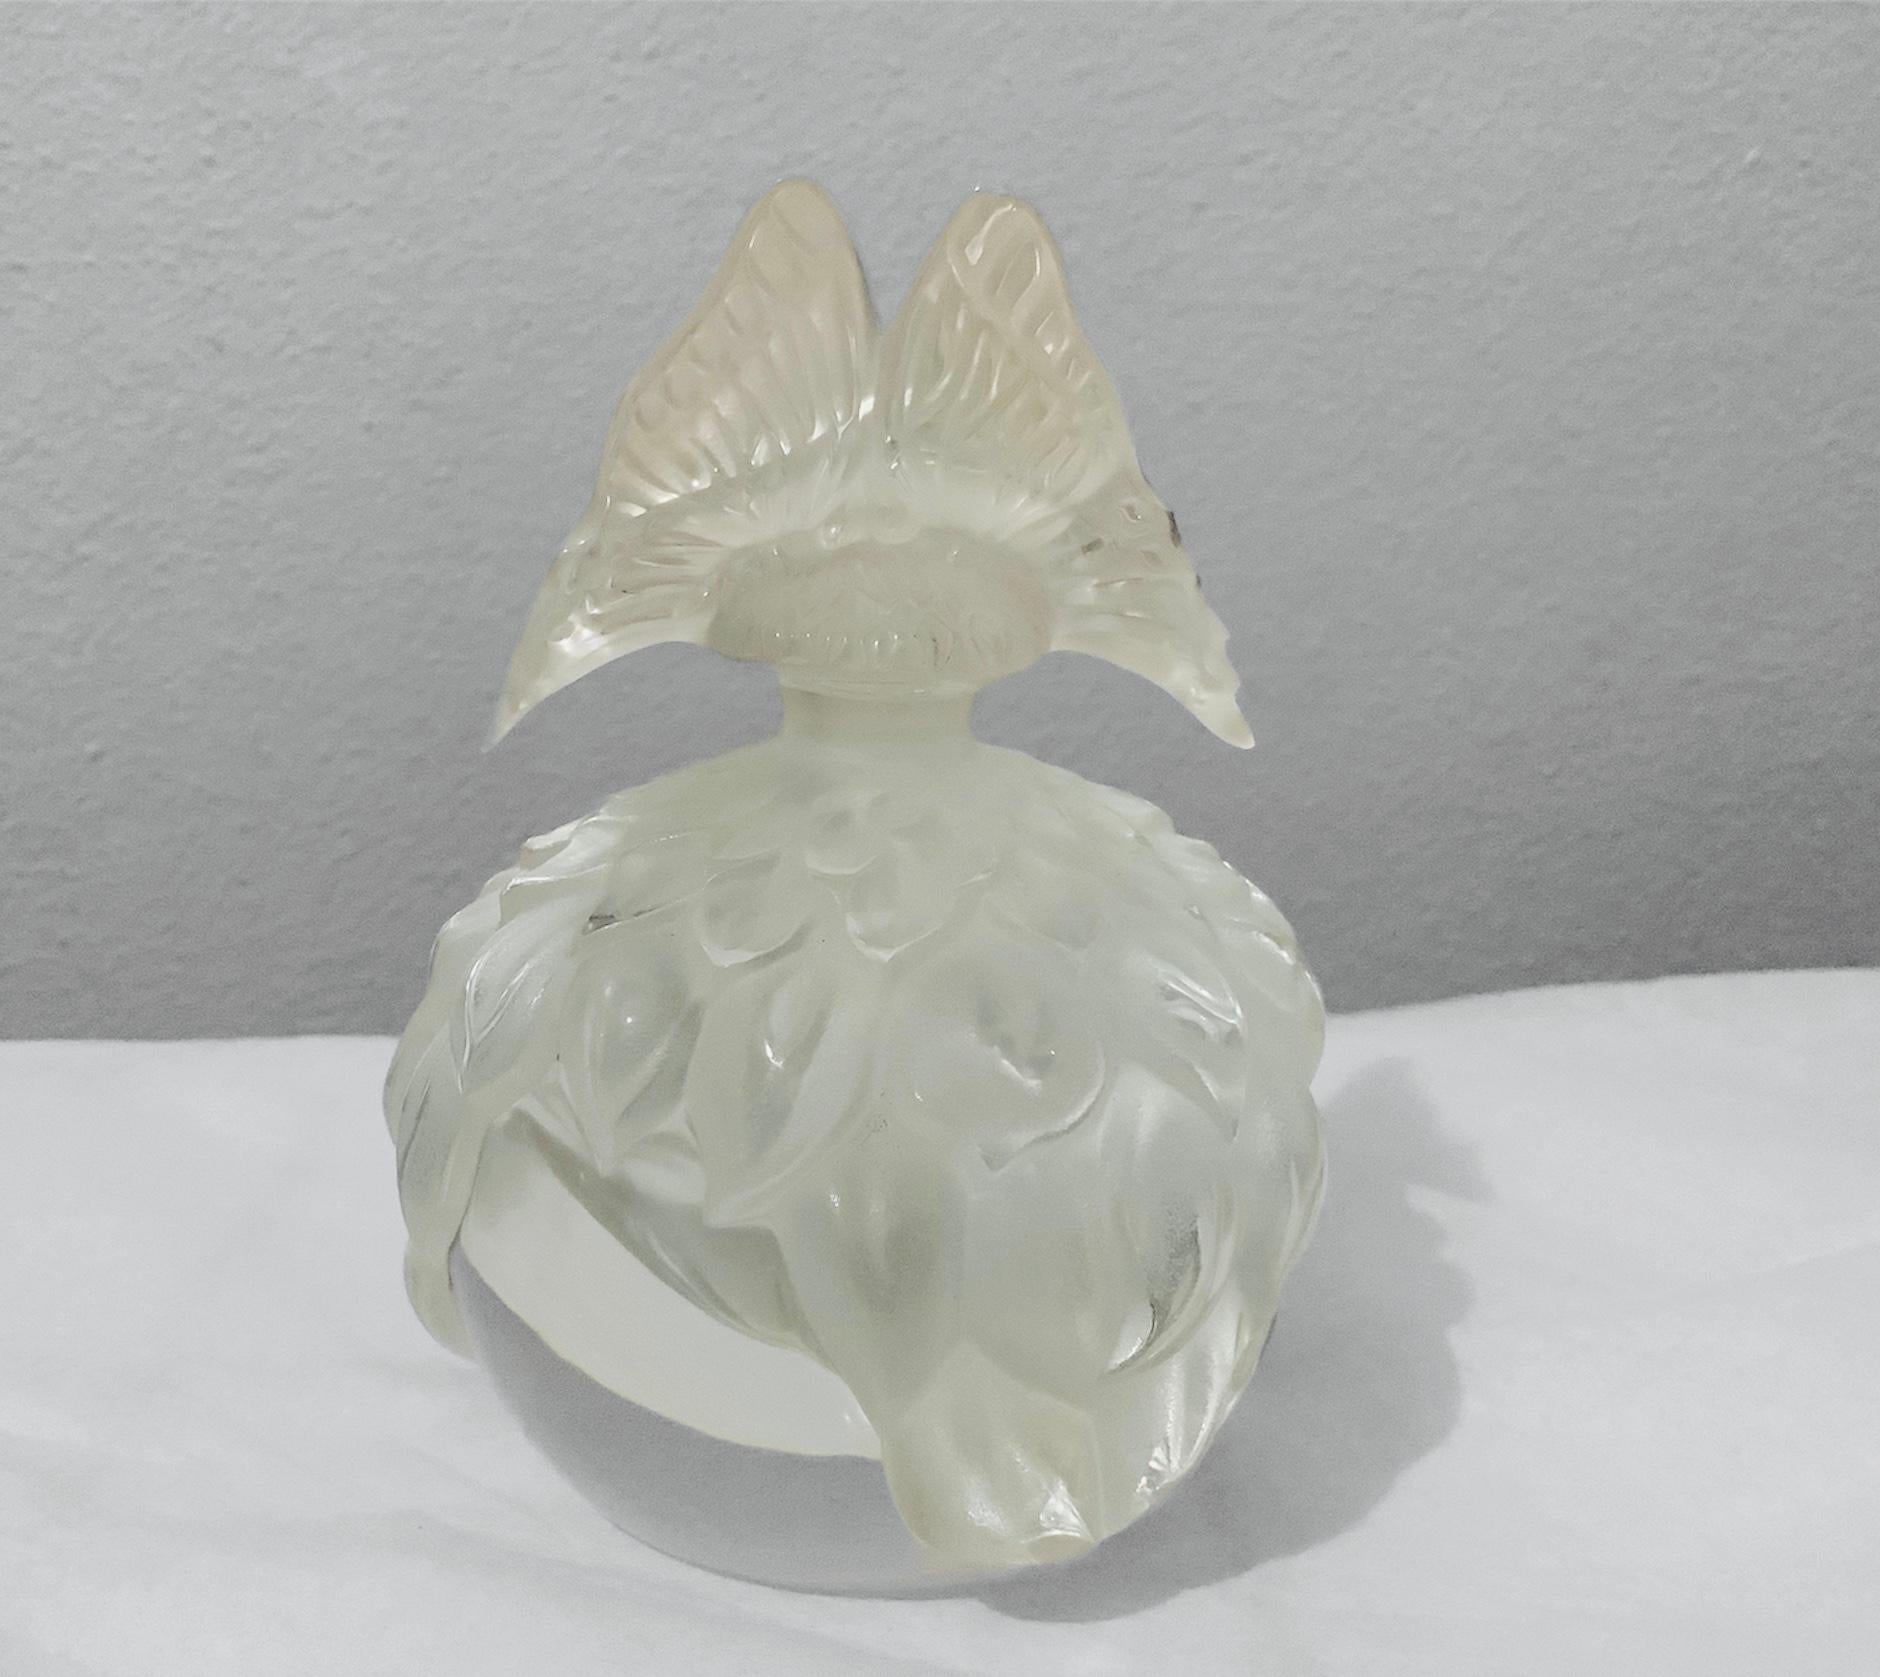 This is a limited edition Pristine Butterfly perfume bottle. It is a round clear bottle depicting some relief of frosted leaves around it. The stopper is shaped as a butterfly. Below the bottle there is a plastic sticker and also is hallmarked